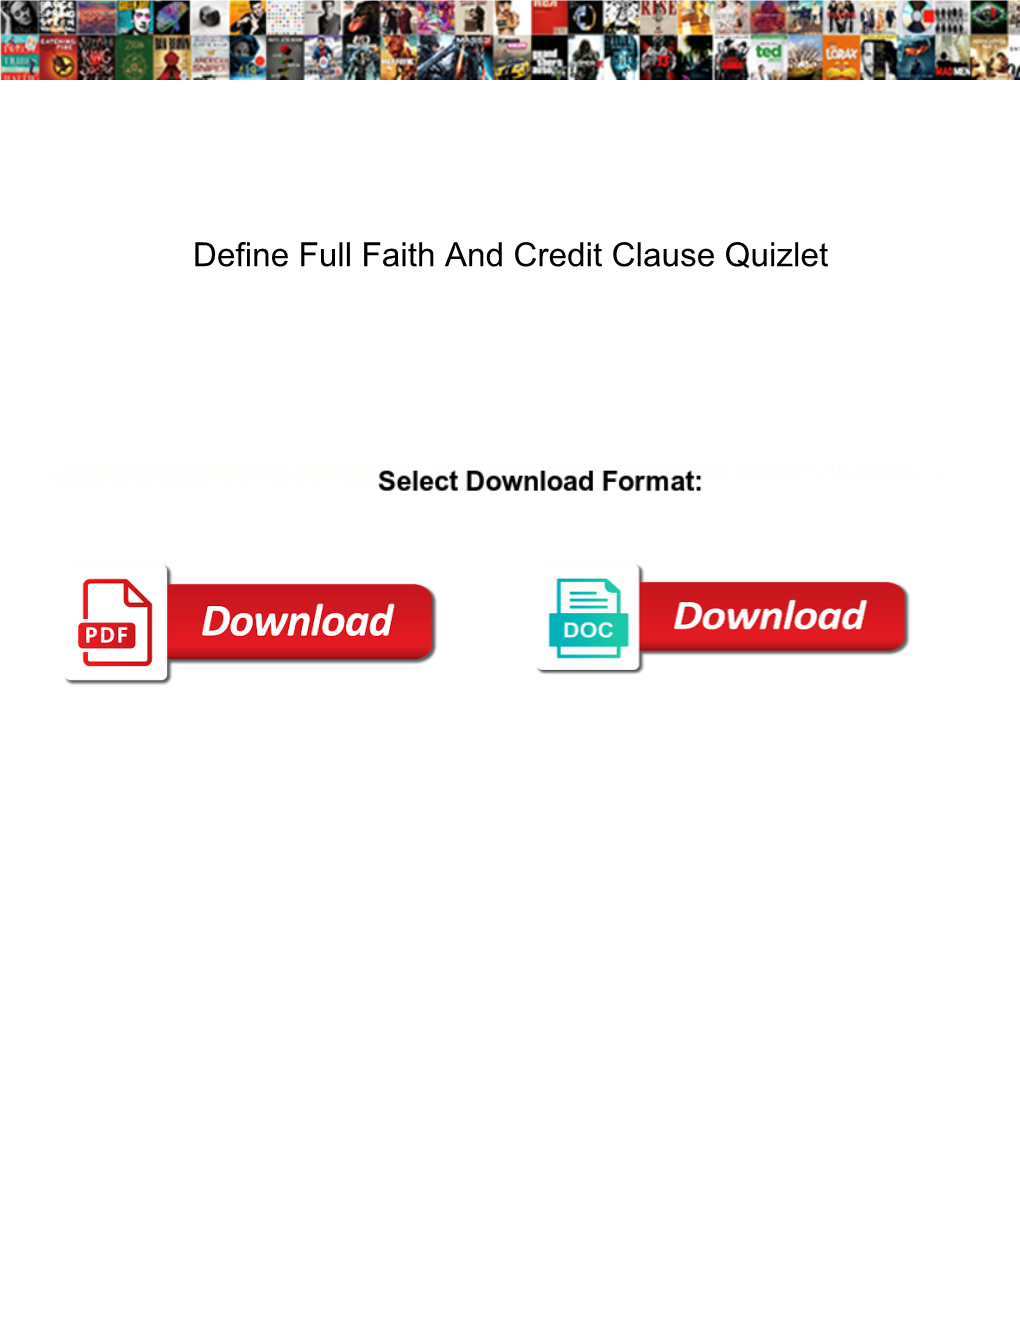 Define Full Faith and Credit Clause Quizlet